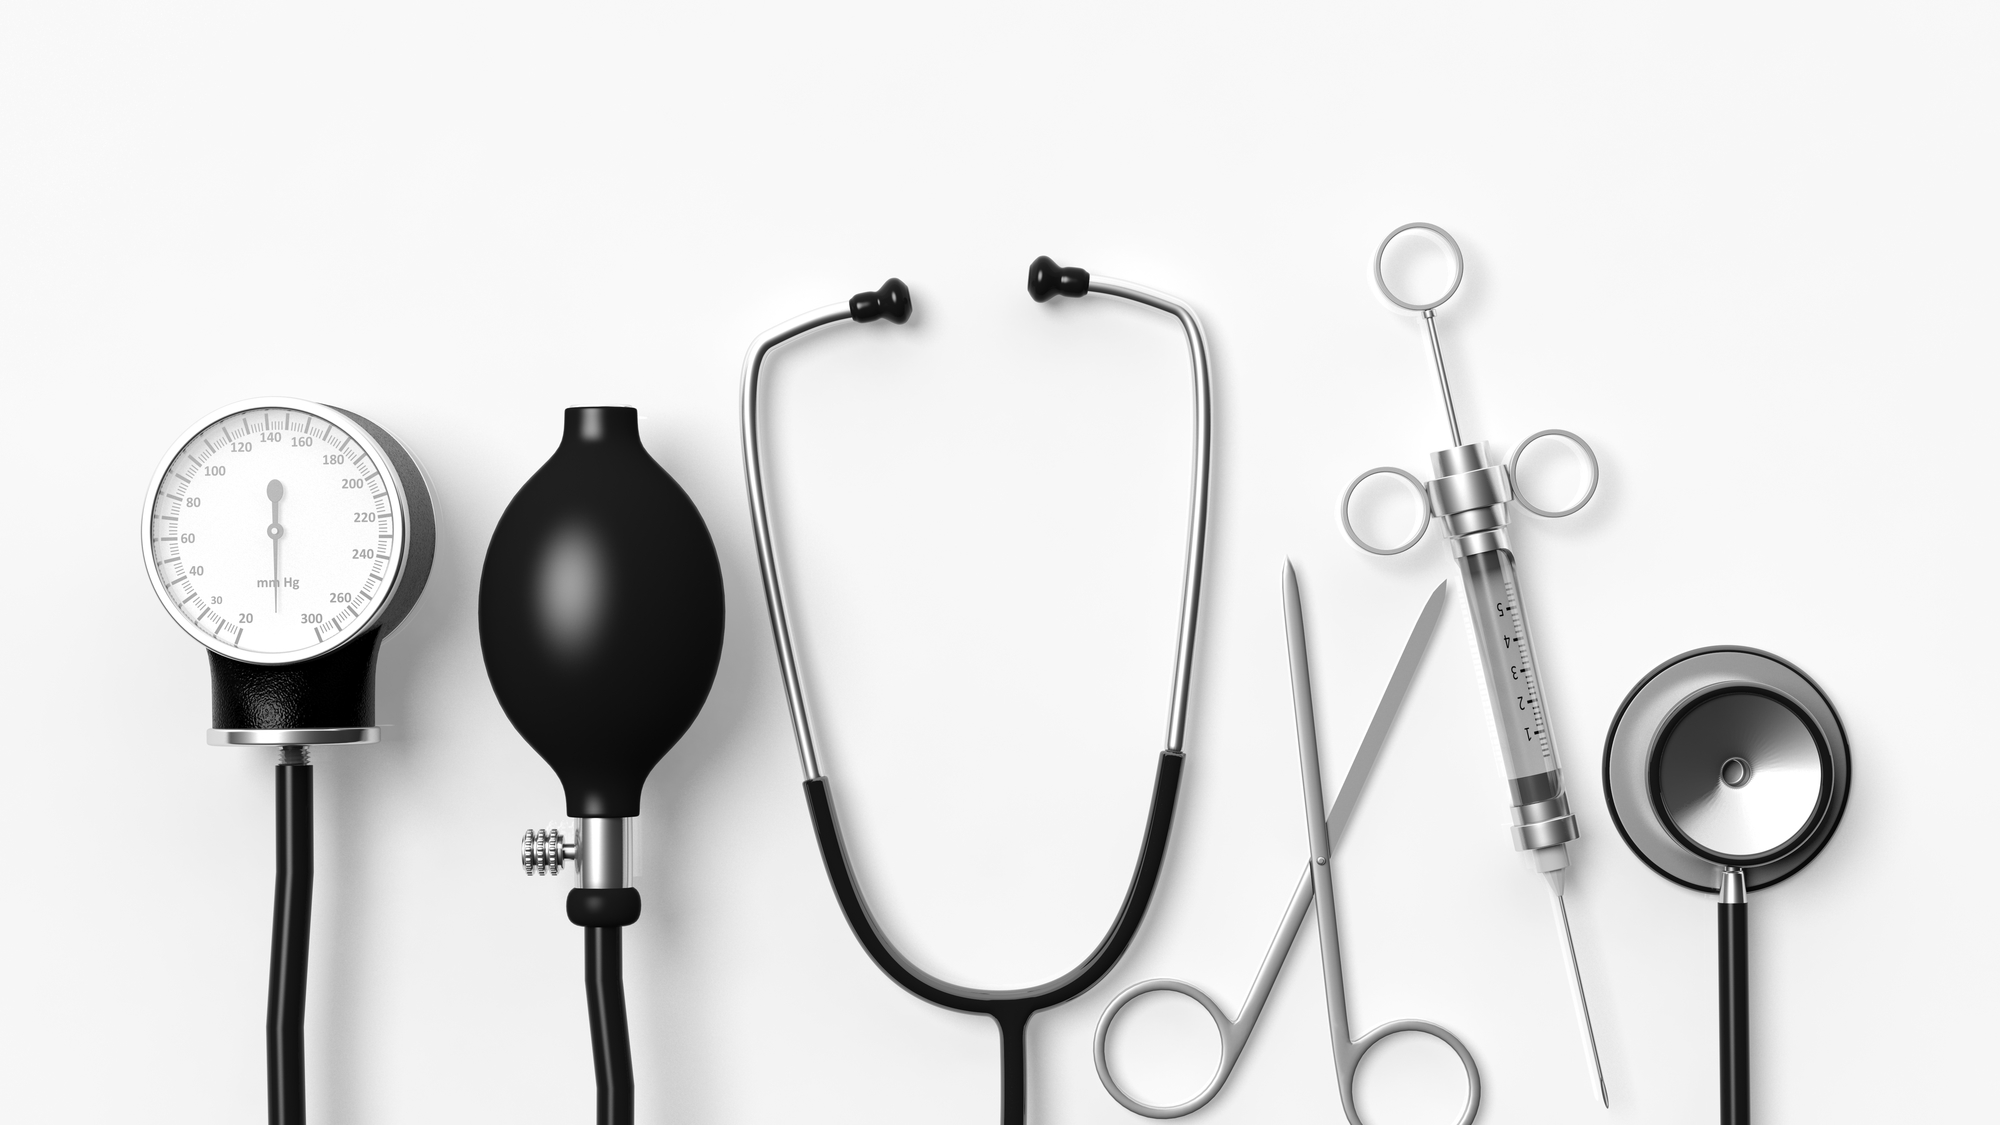 Medical Supplies and Equipment to Start A Medical Practice - Dr. Bill